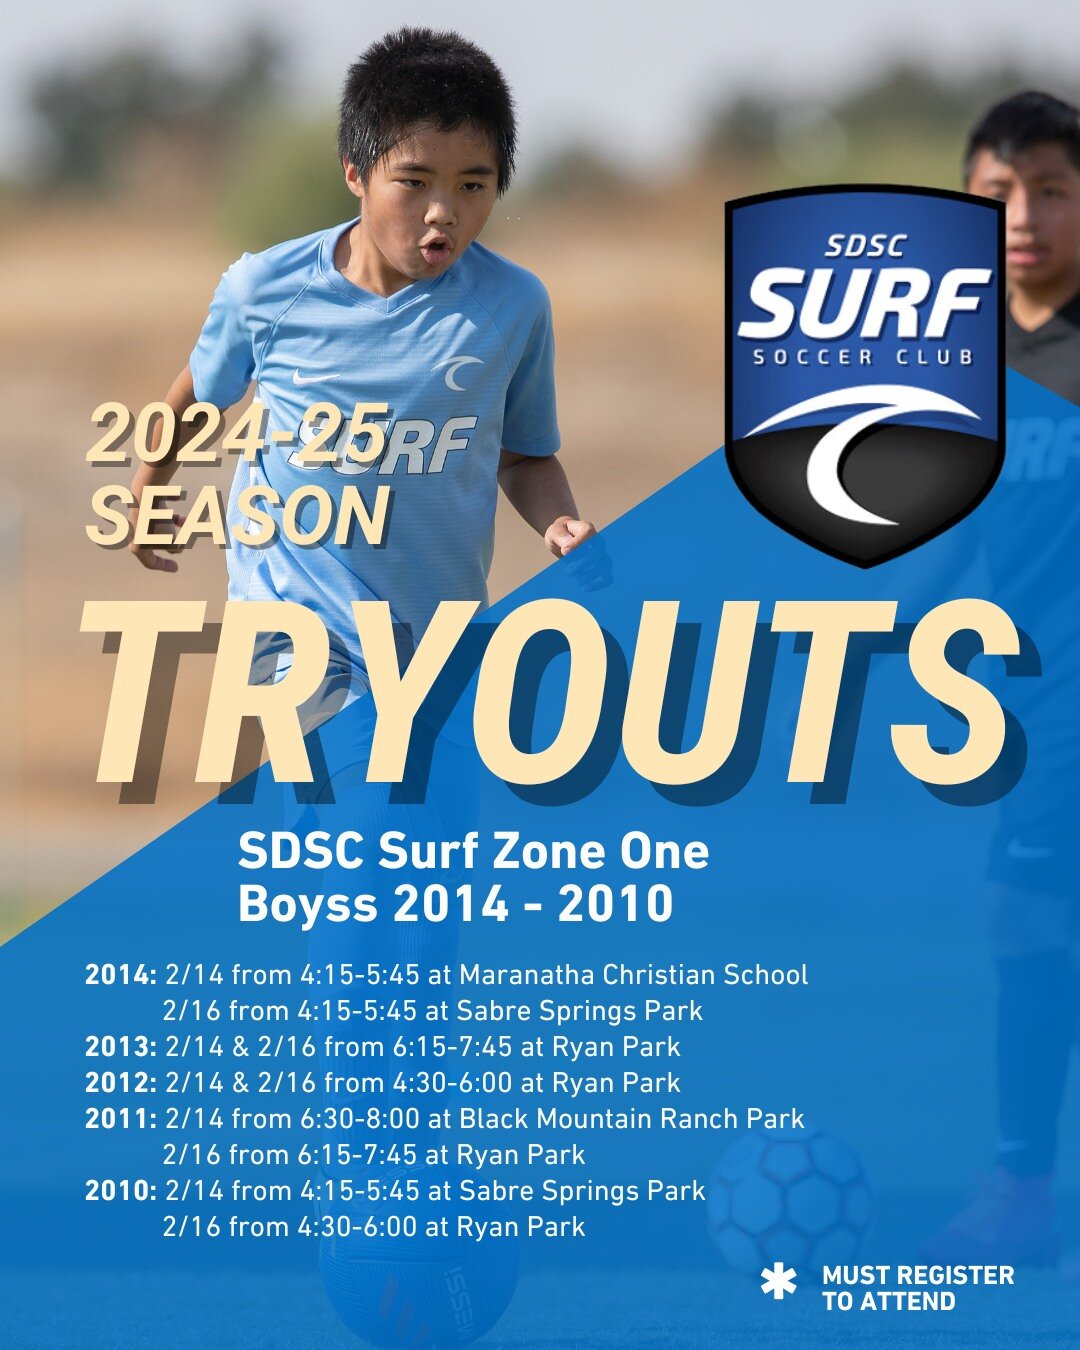 REVISED TRYOUT SCHEDULE! 📣

Dates, times, and locations for the B2010-2014 boys and G2010-G2014 girls for the 2024/25 SDSC Surf teams. All players, including returning SDSC Surf players, must register for tryouts to be evaluated and placed on the be